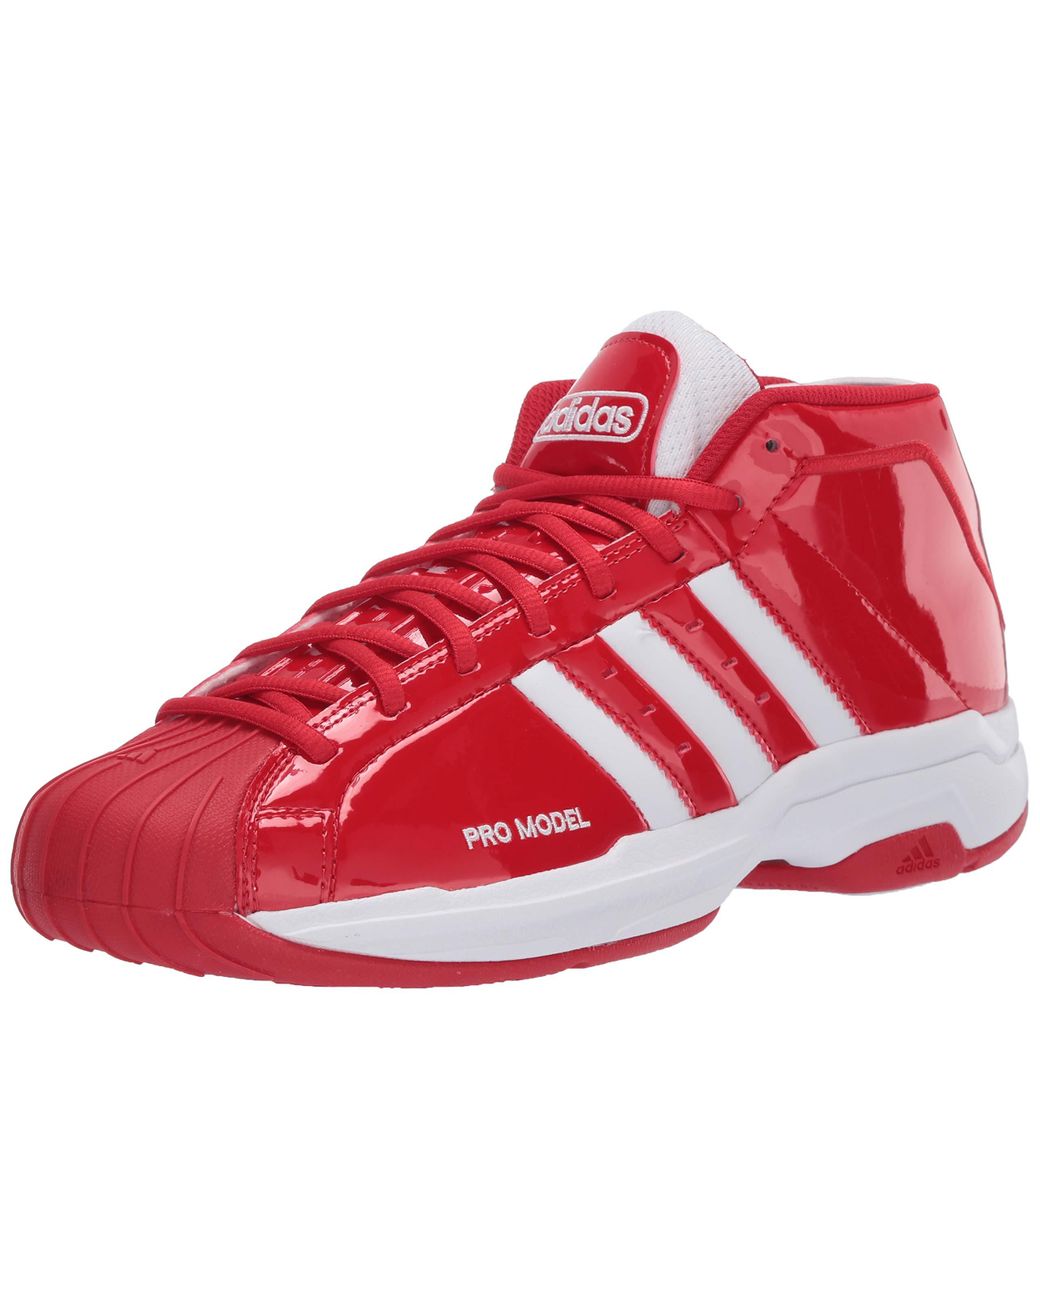 adidas Unisex Pro Model 2g Sneaker in Red - Save 30% - Lyst